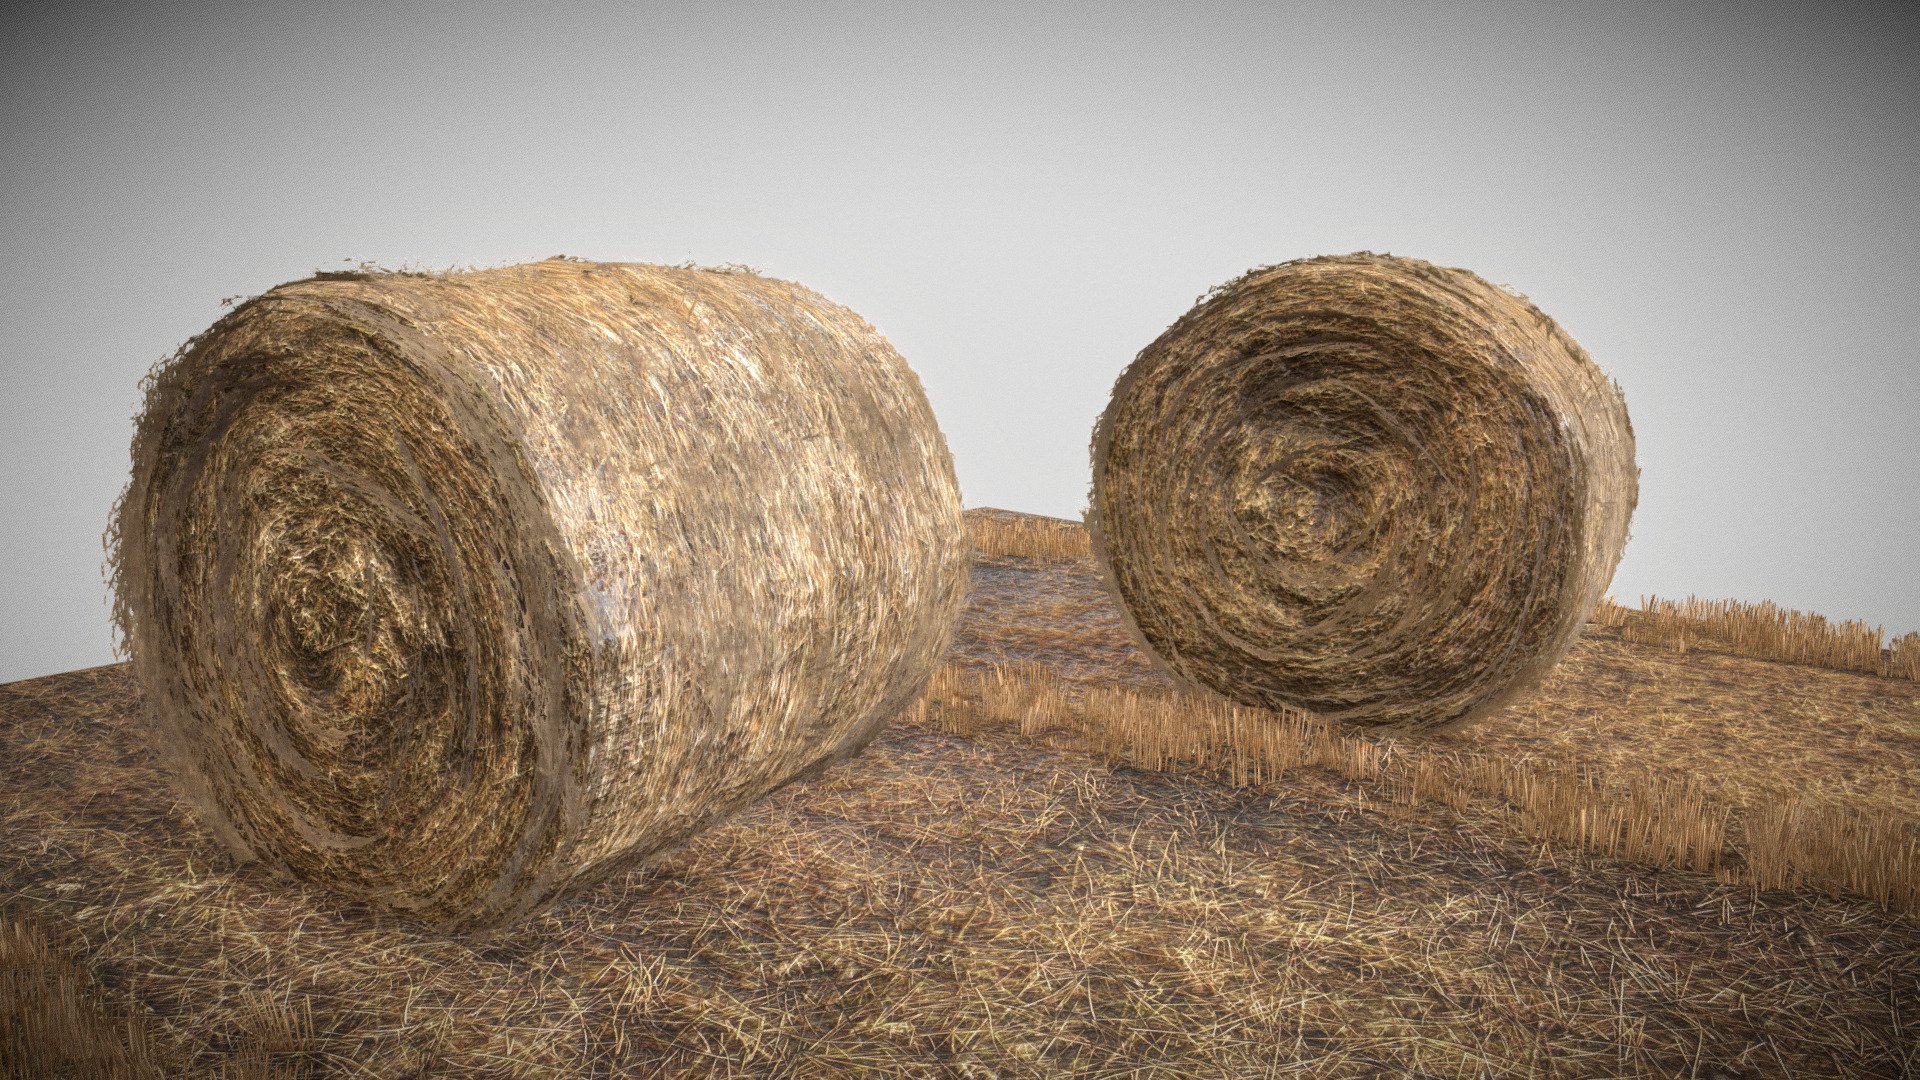 Round Hay Bale

Lowpoly hay bale asset with short wheat grass 3d model